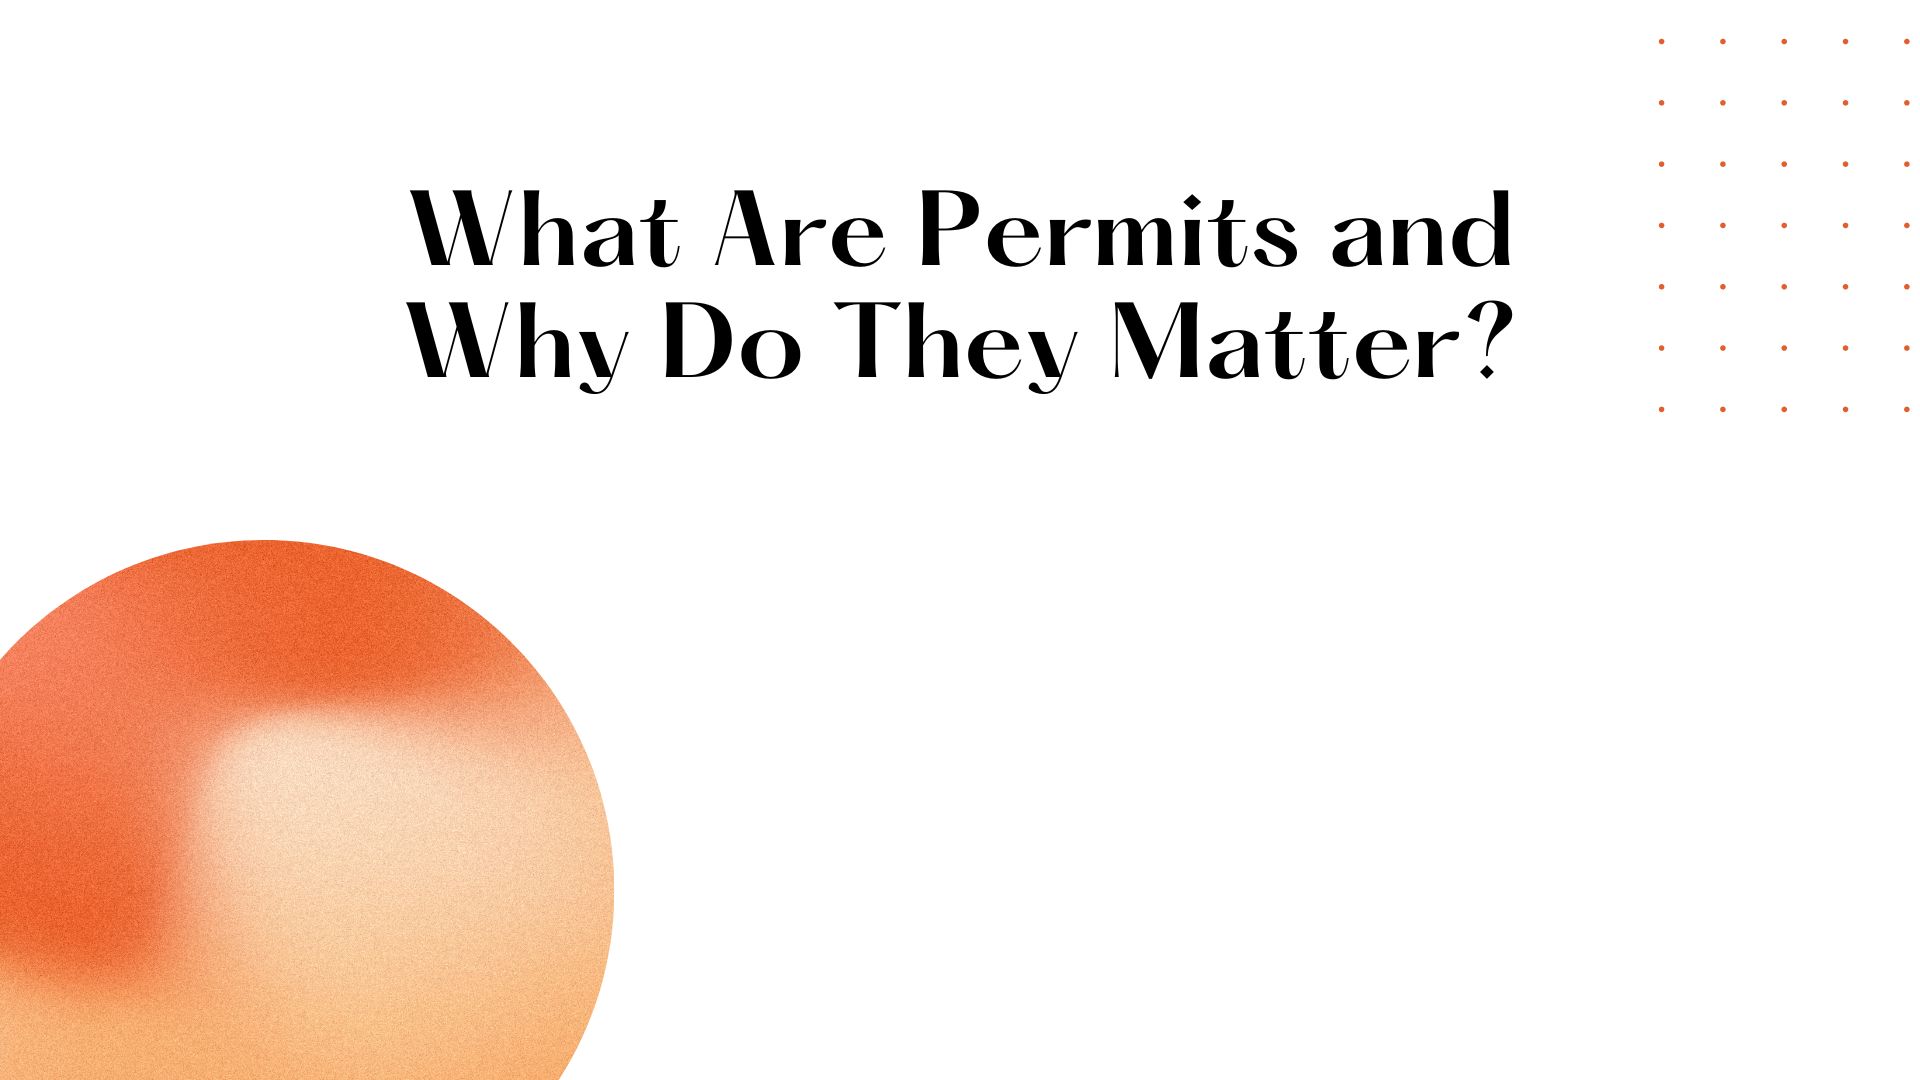 What Are Permits and Why Do They Matter